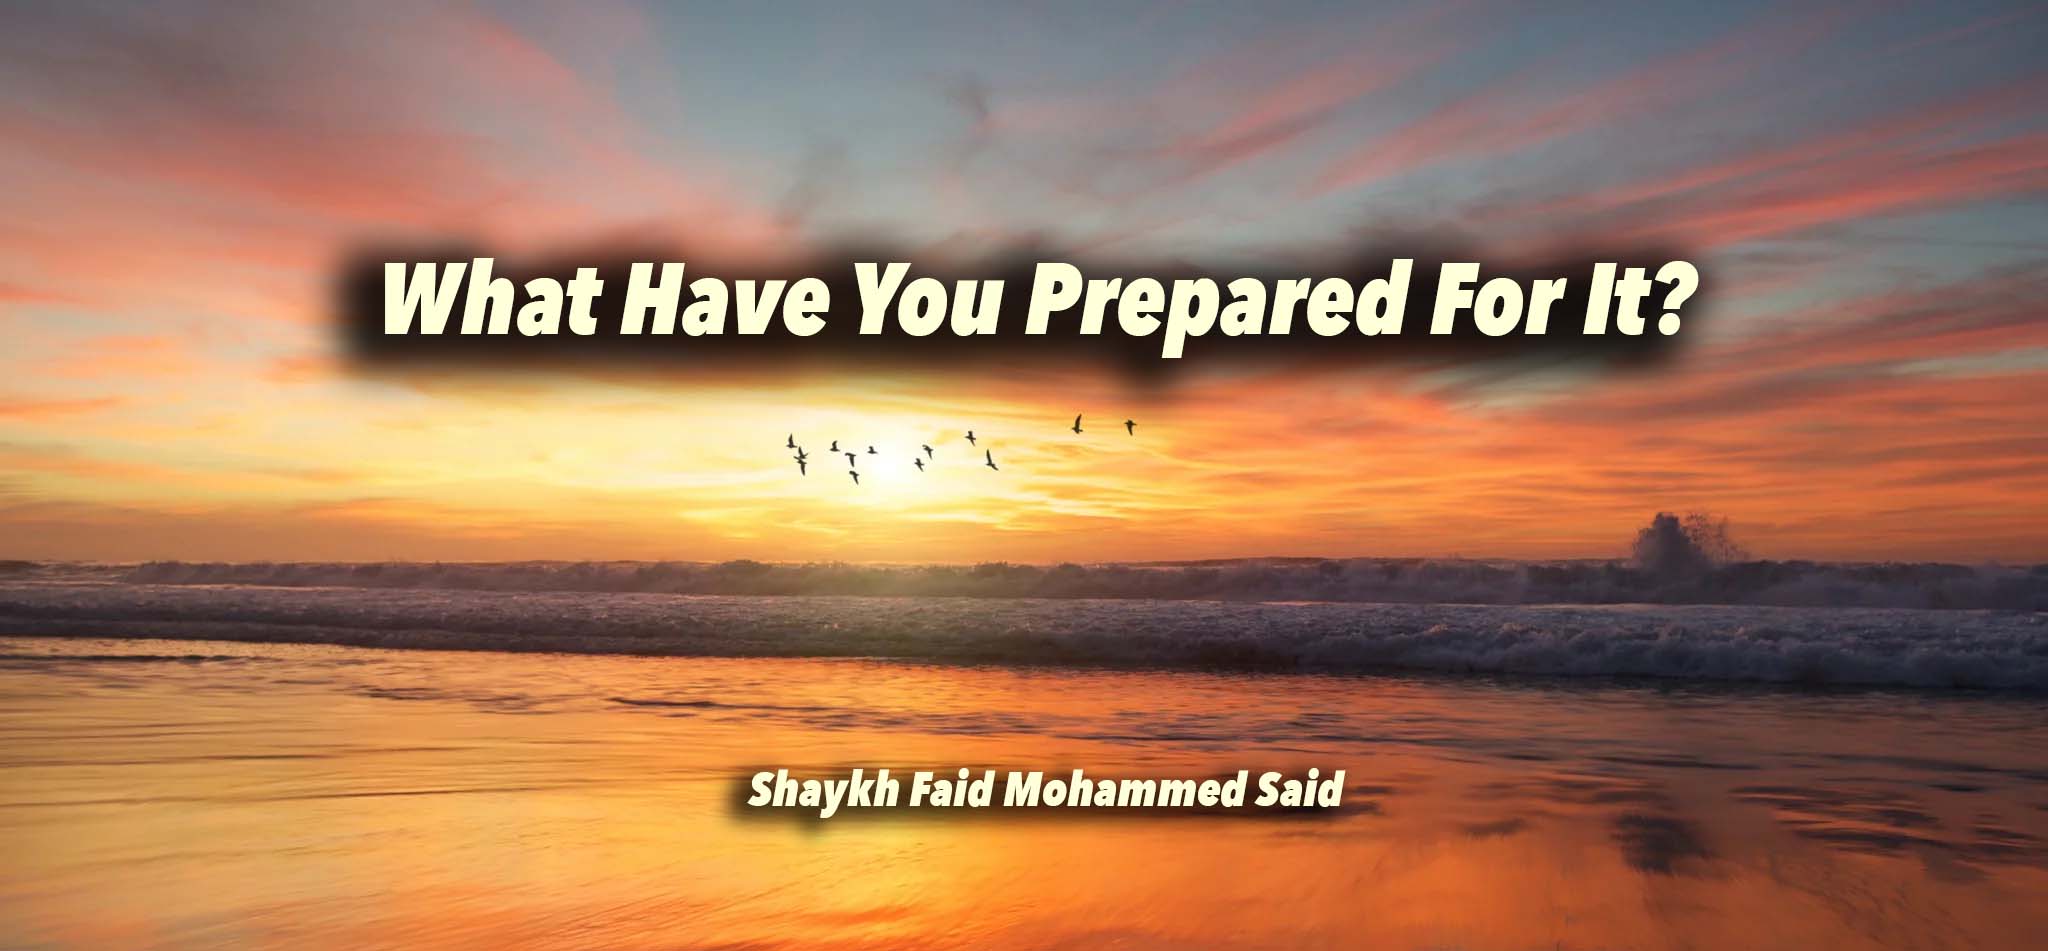 What have you prepared for it?